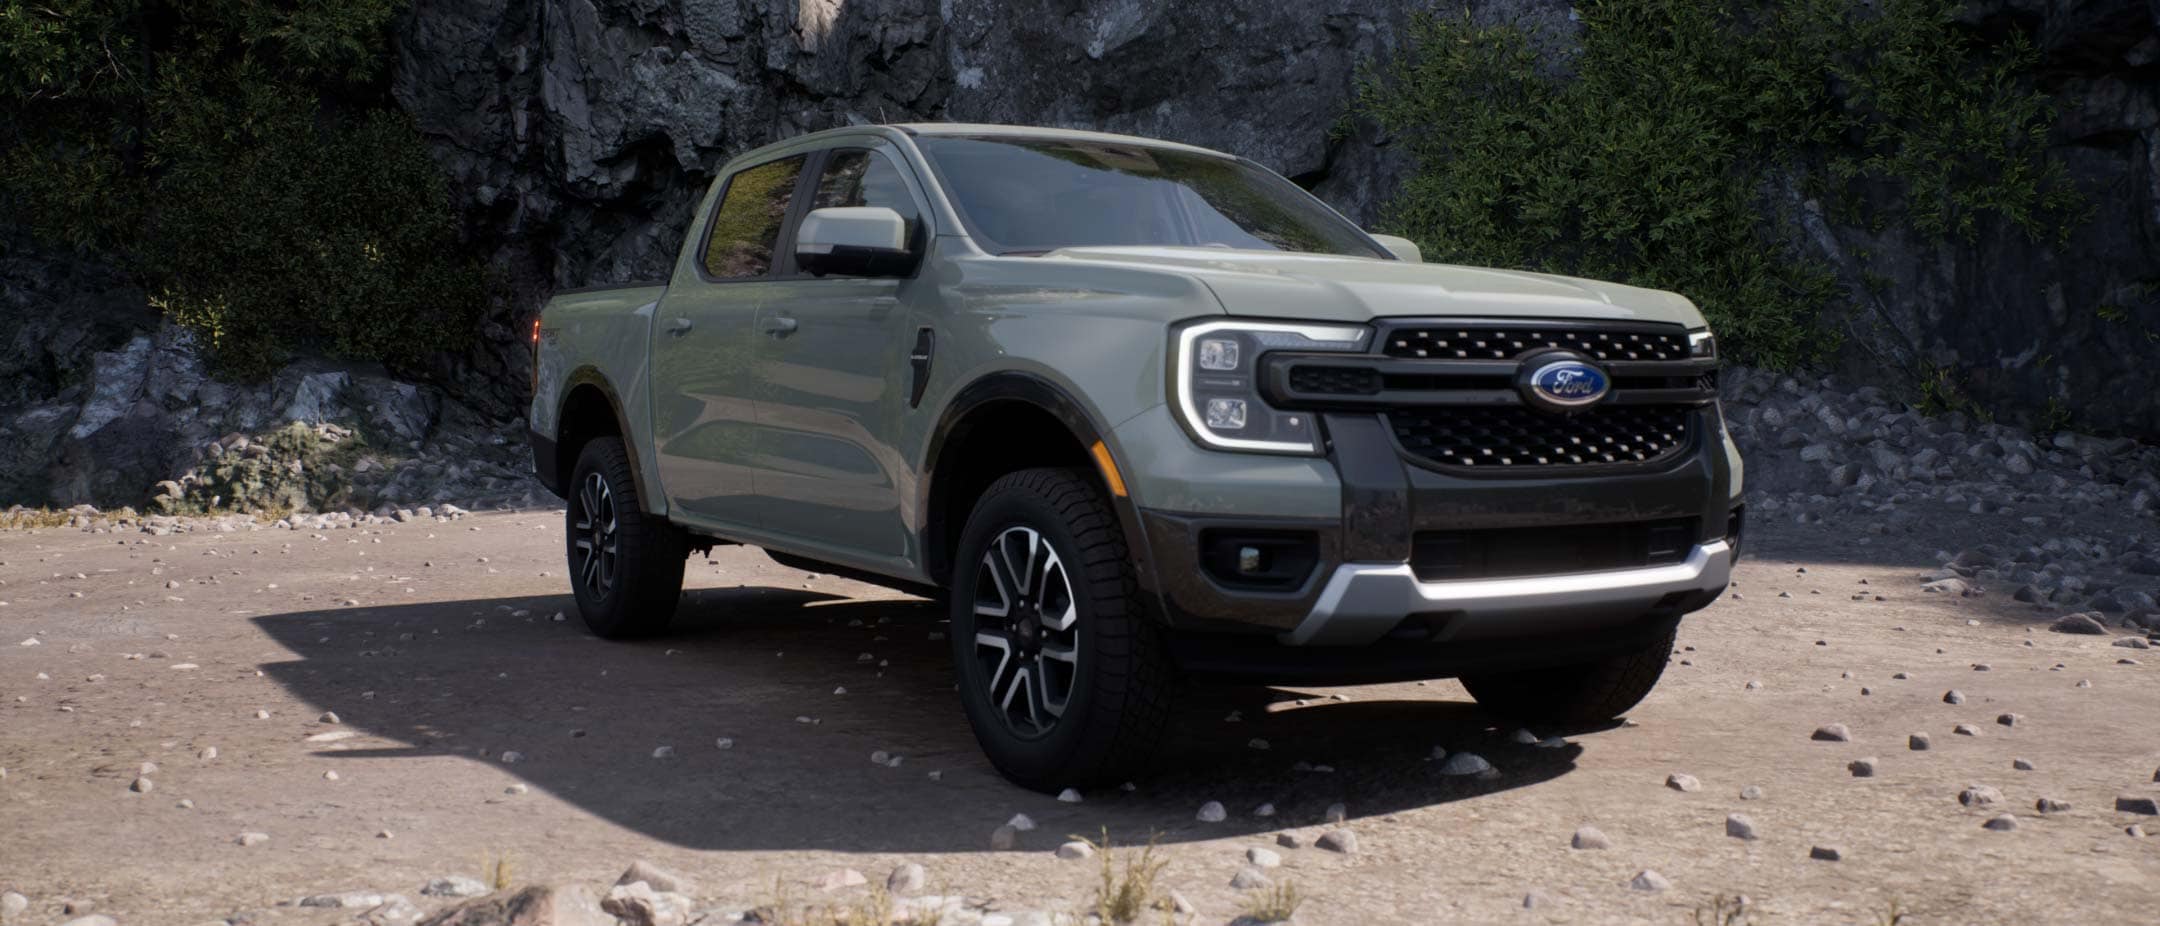 Ford Ranger unveiled for rest of world, looks great - CNET